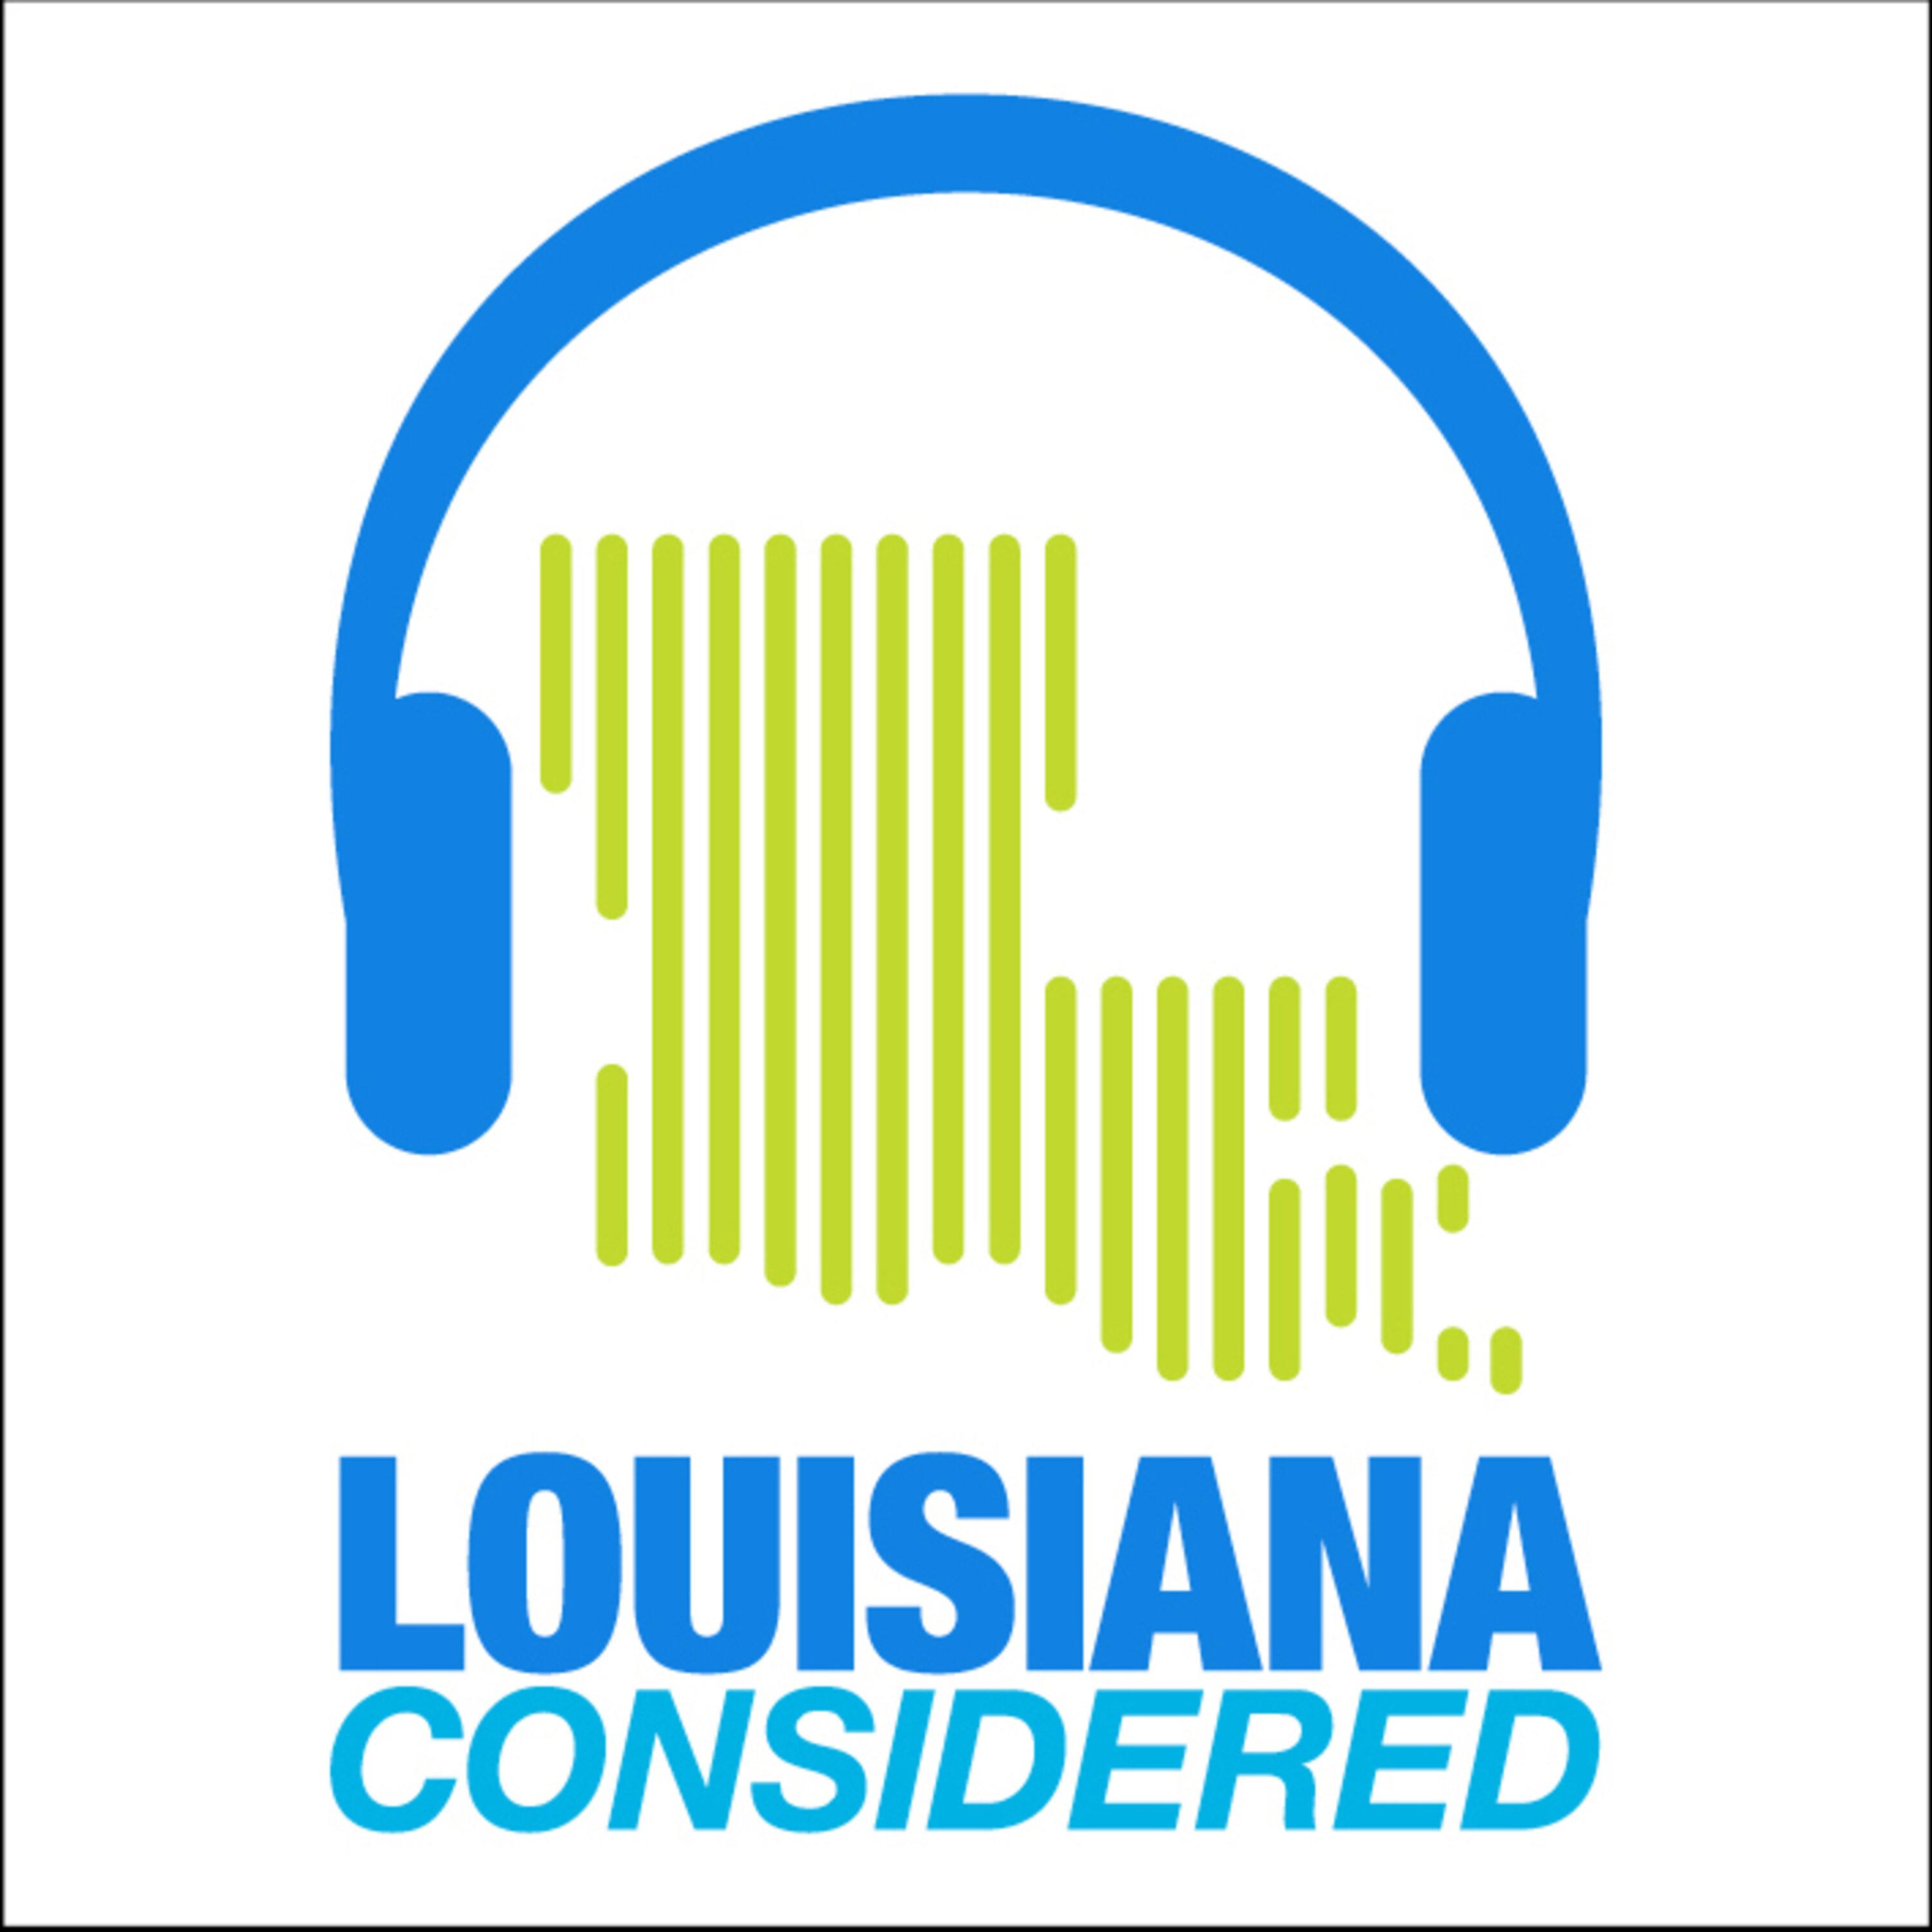 Thumbnail for "Louisiana Considered: LaPlace residents weigh options after Hurricane Ida".